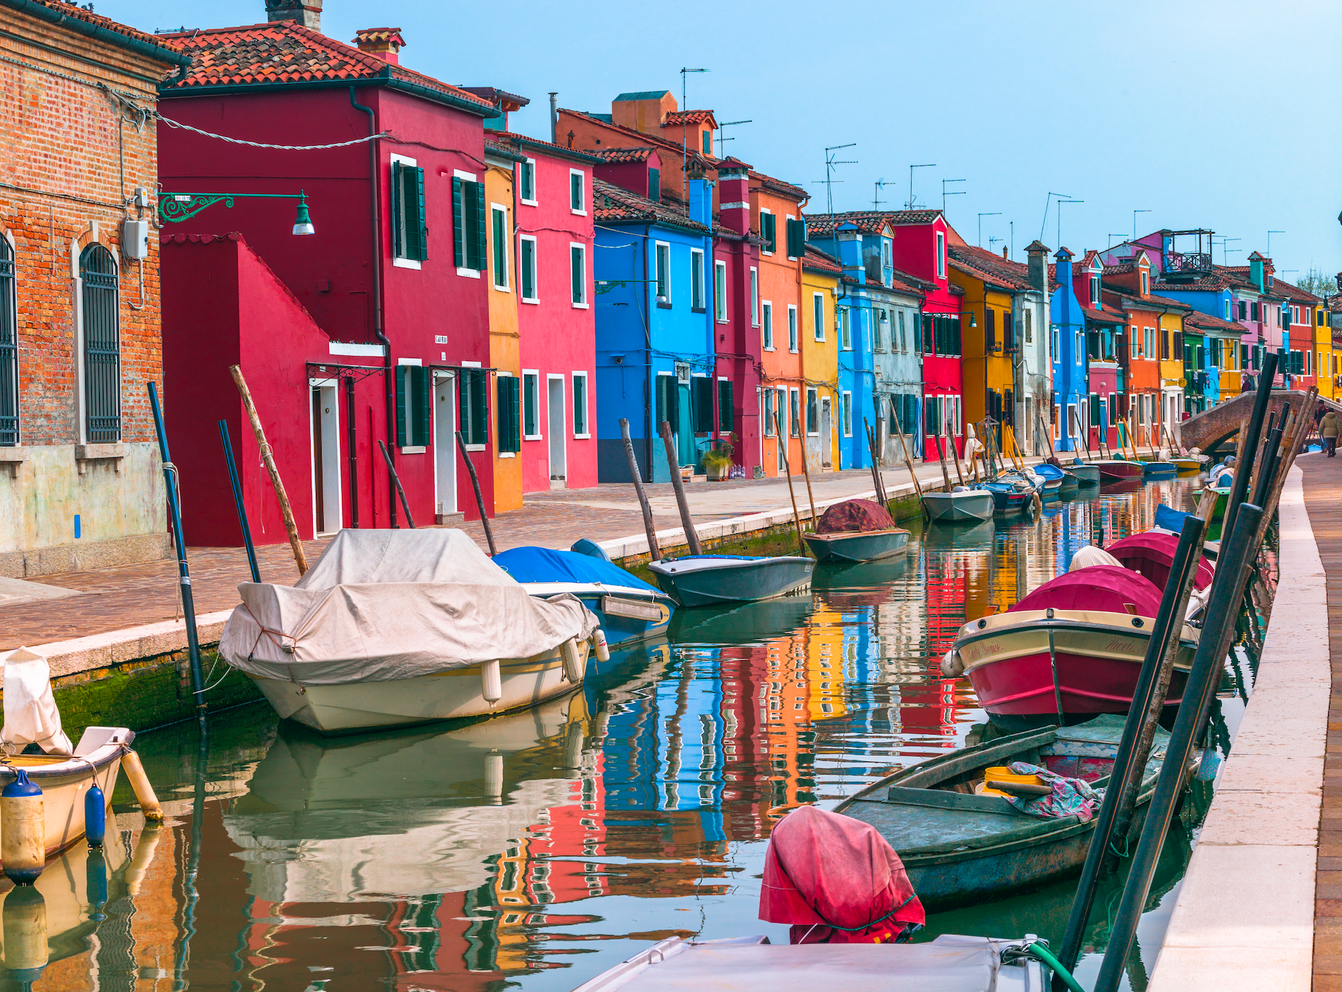 The Canals of Burano